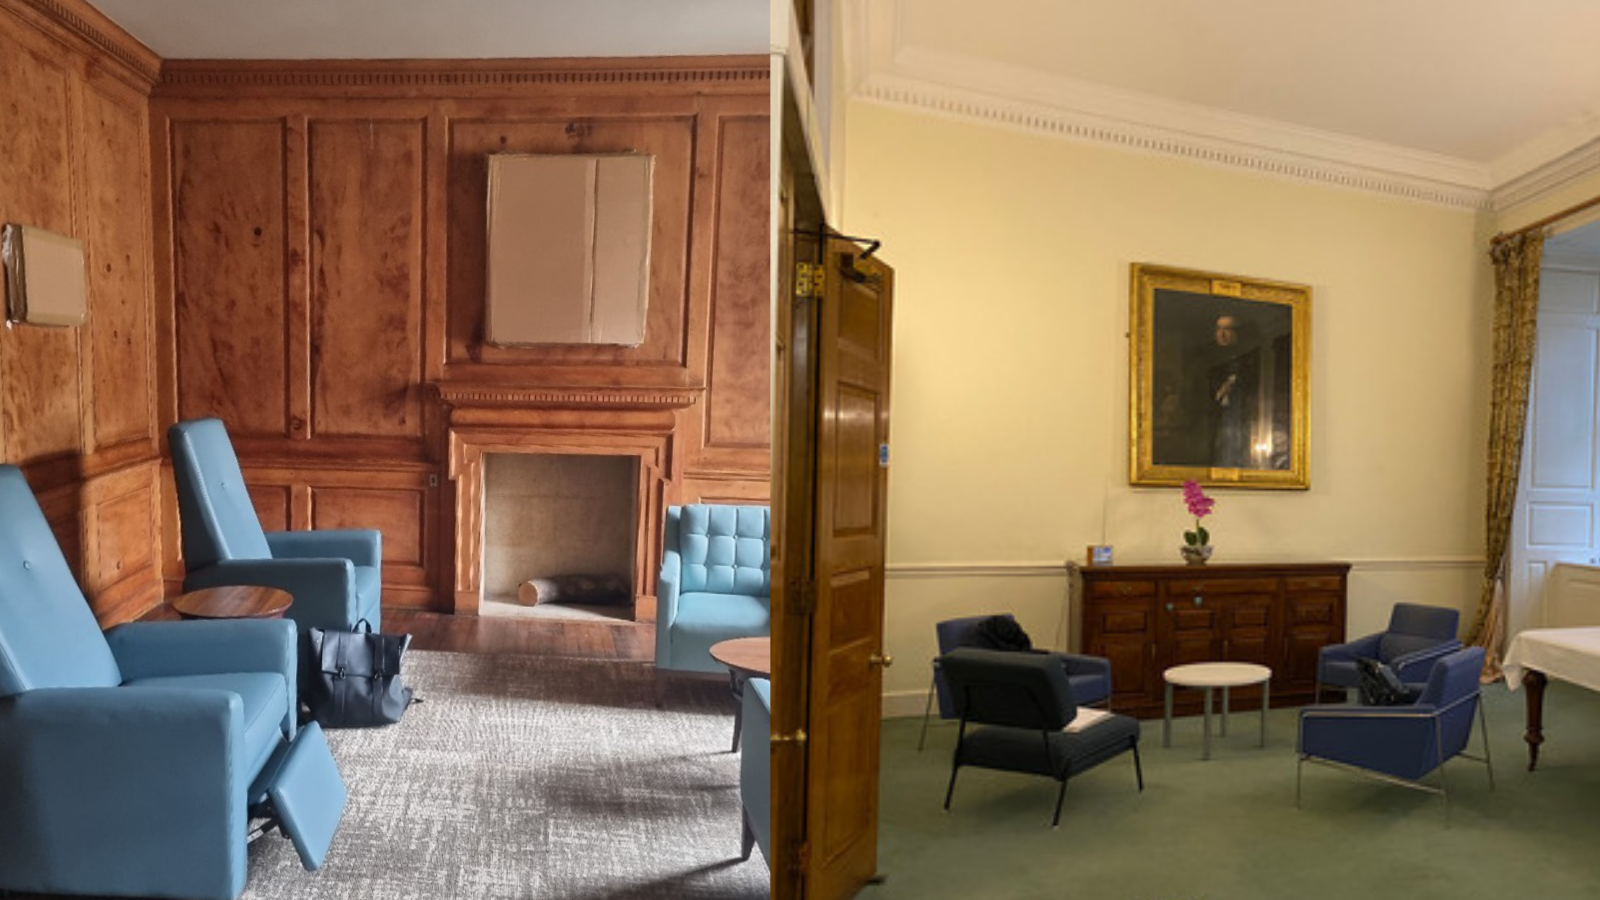 Before and after pictures of the St Bartholomew's staff wellbeing hub